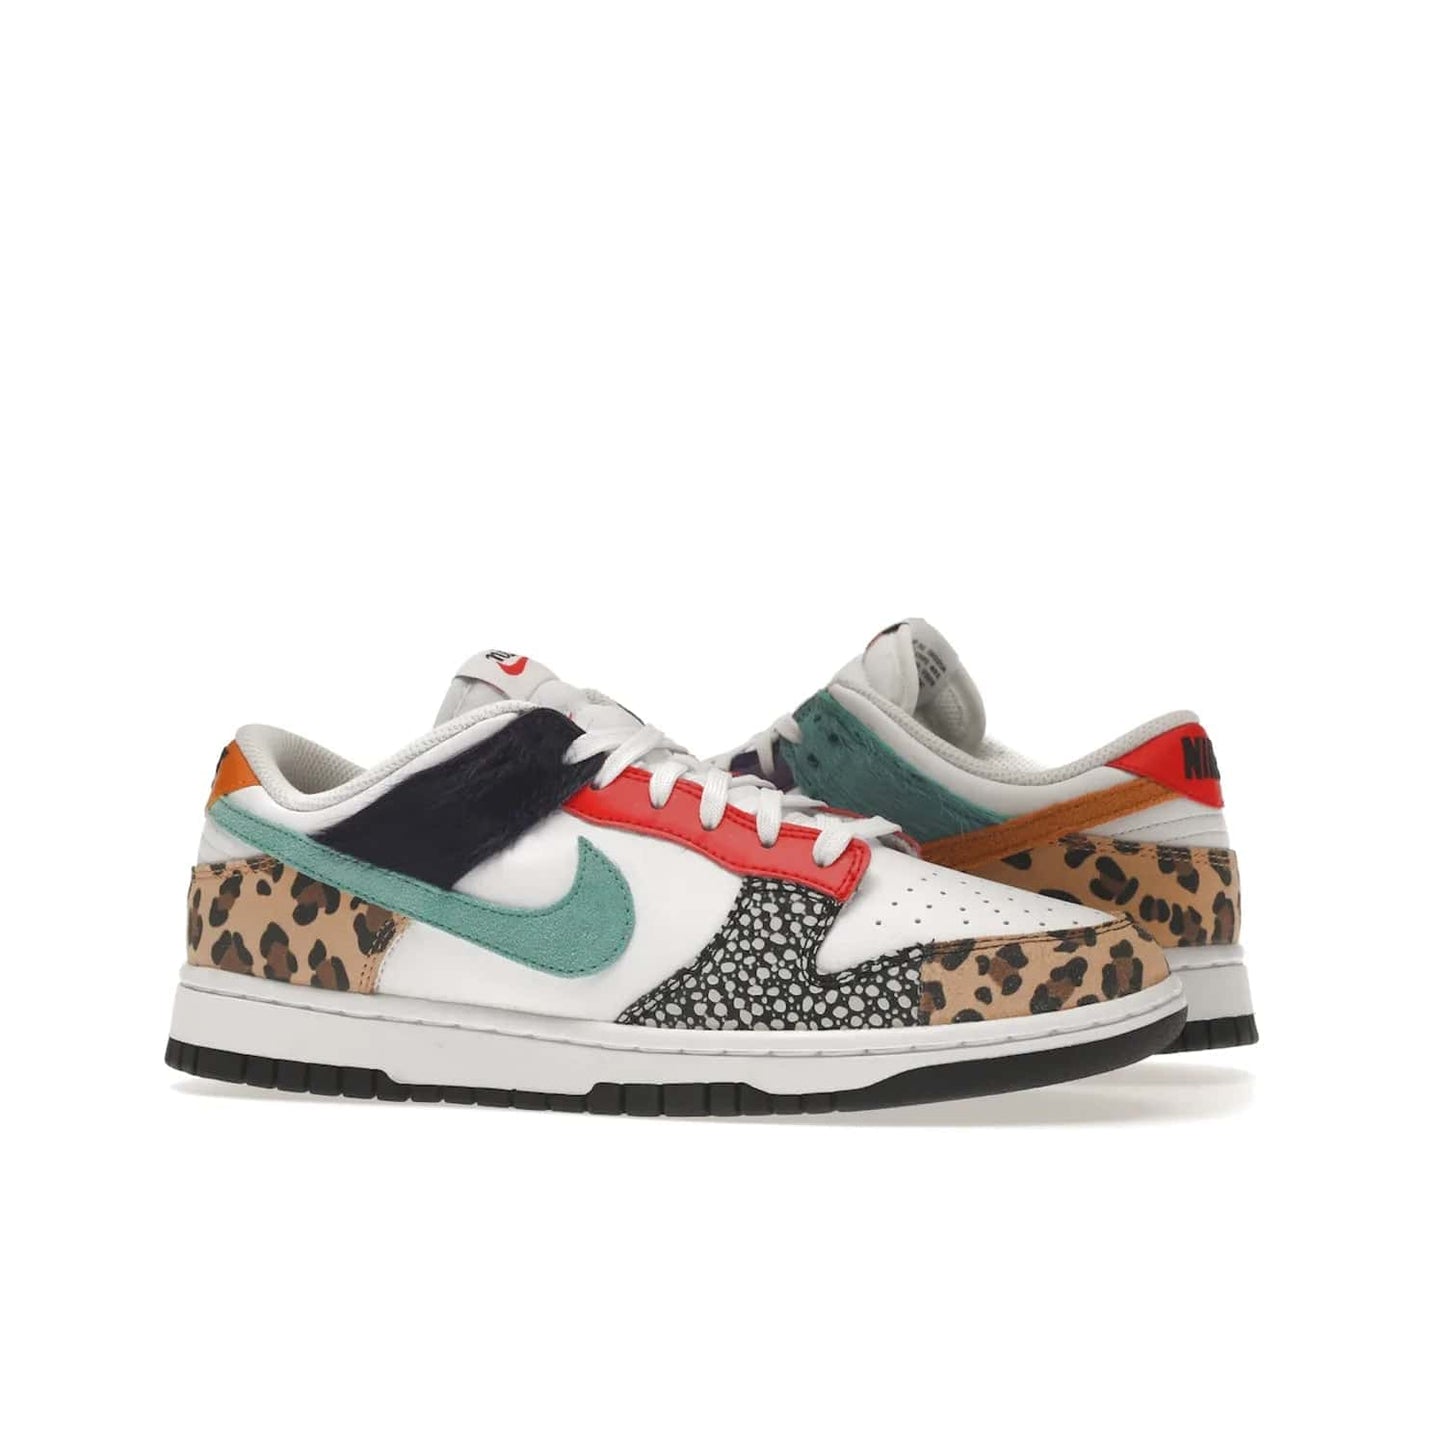 Nike Dunk Low Safari Mix (Women's) - Image 3 - Only at www.BallersClubKickz.com - Express your unique style with the Women’s Nike Dunk Low Safari Mix. Featuring a vibrant mix of white leather, leopard Durabuck, faux-horsehair, suede, and more, this stylish sneaker will turn heads. Shop now for a bold look at an affordable $120 price tag. Available in May 2022.